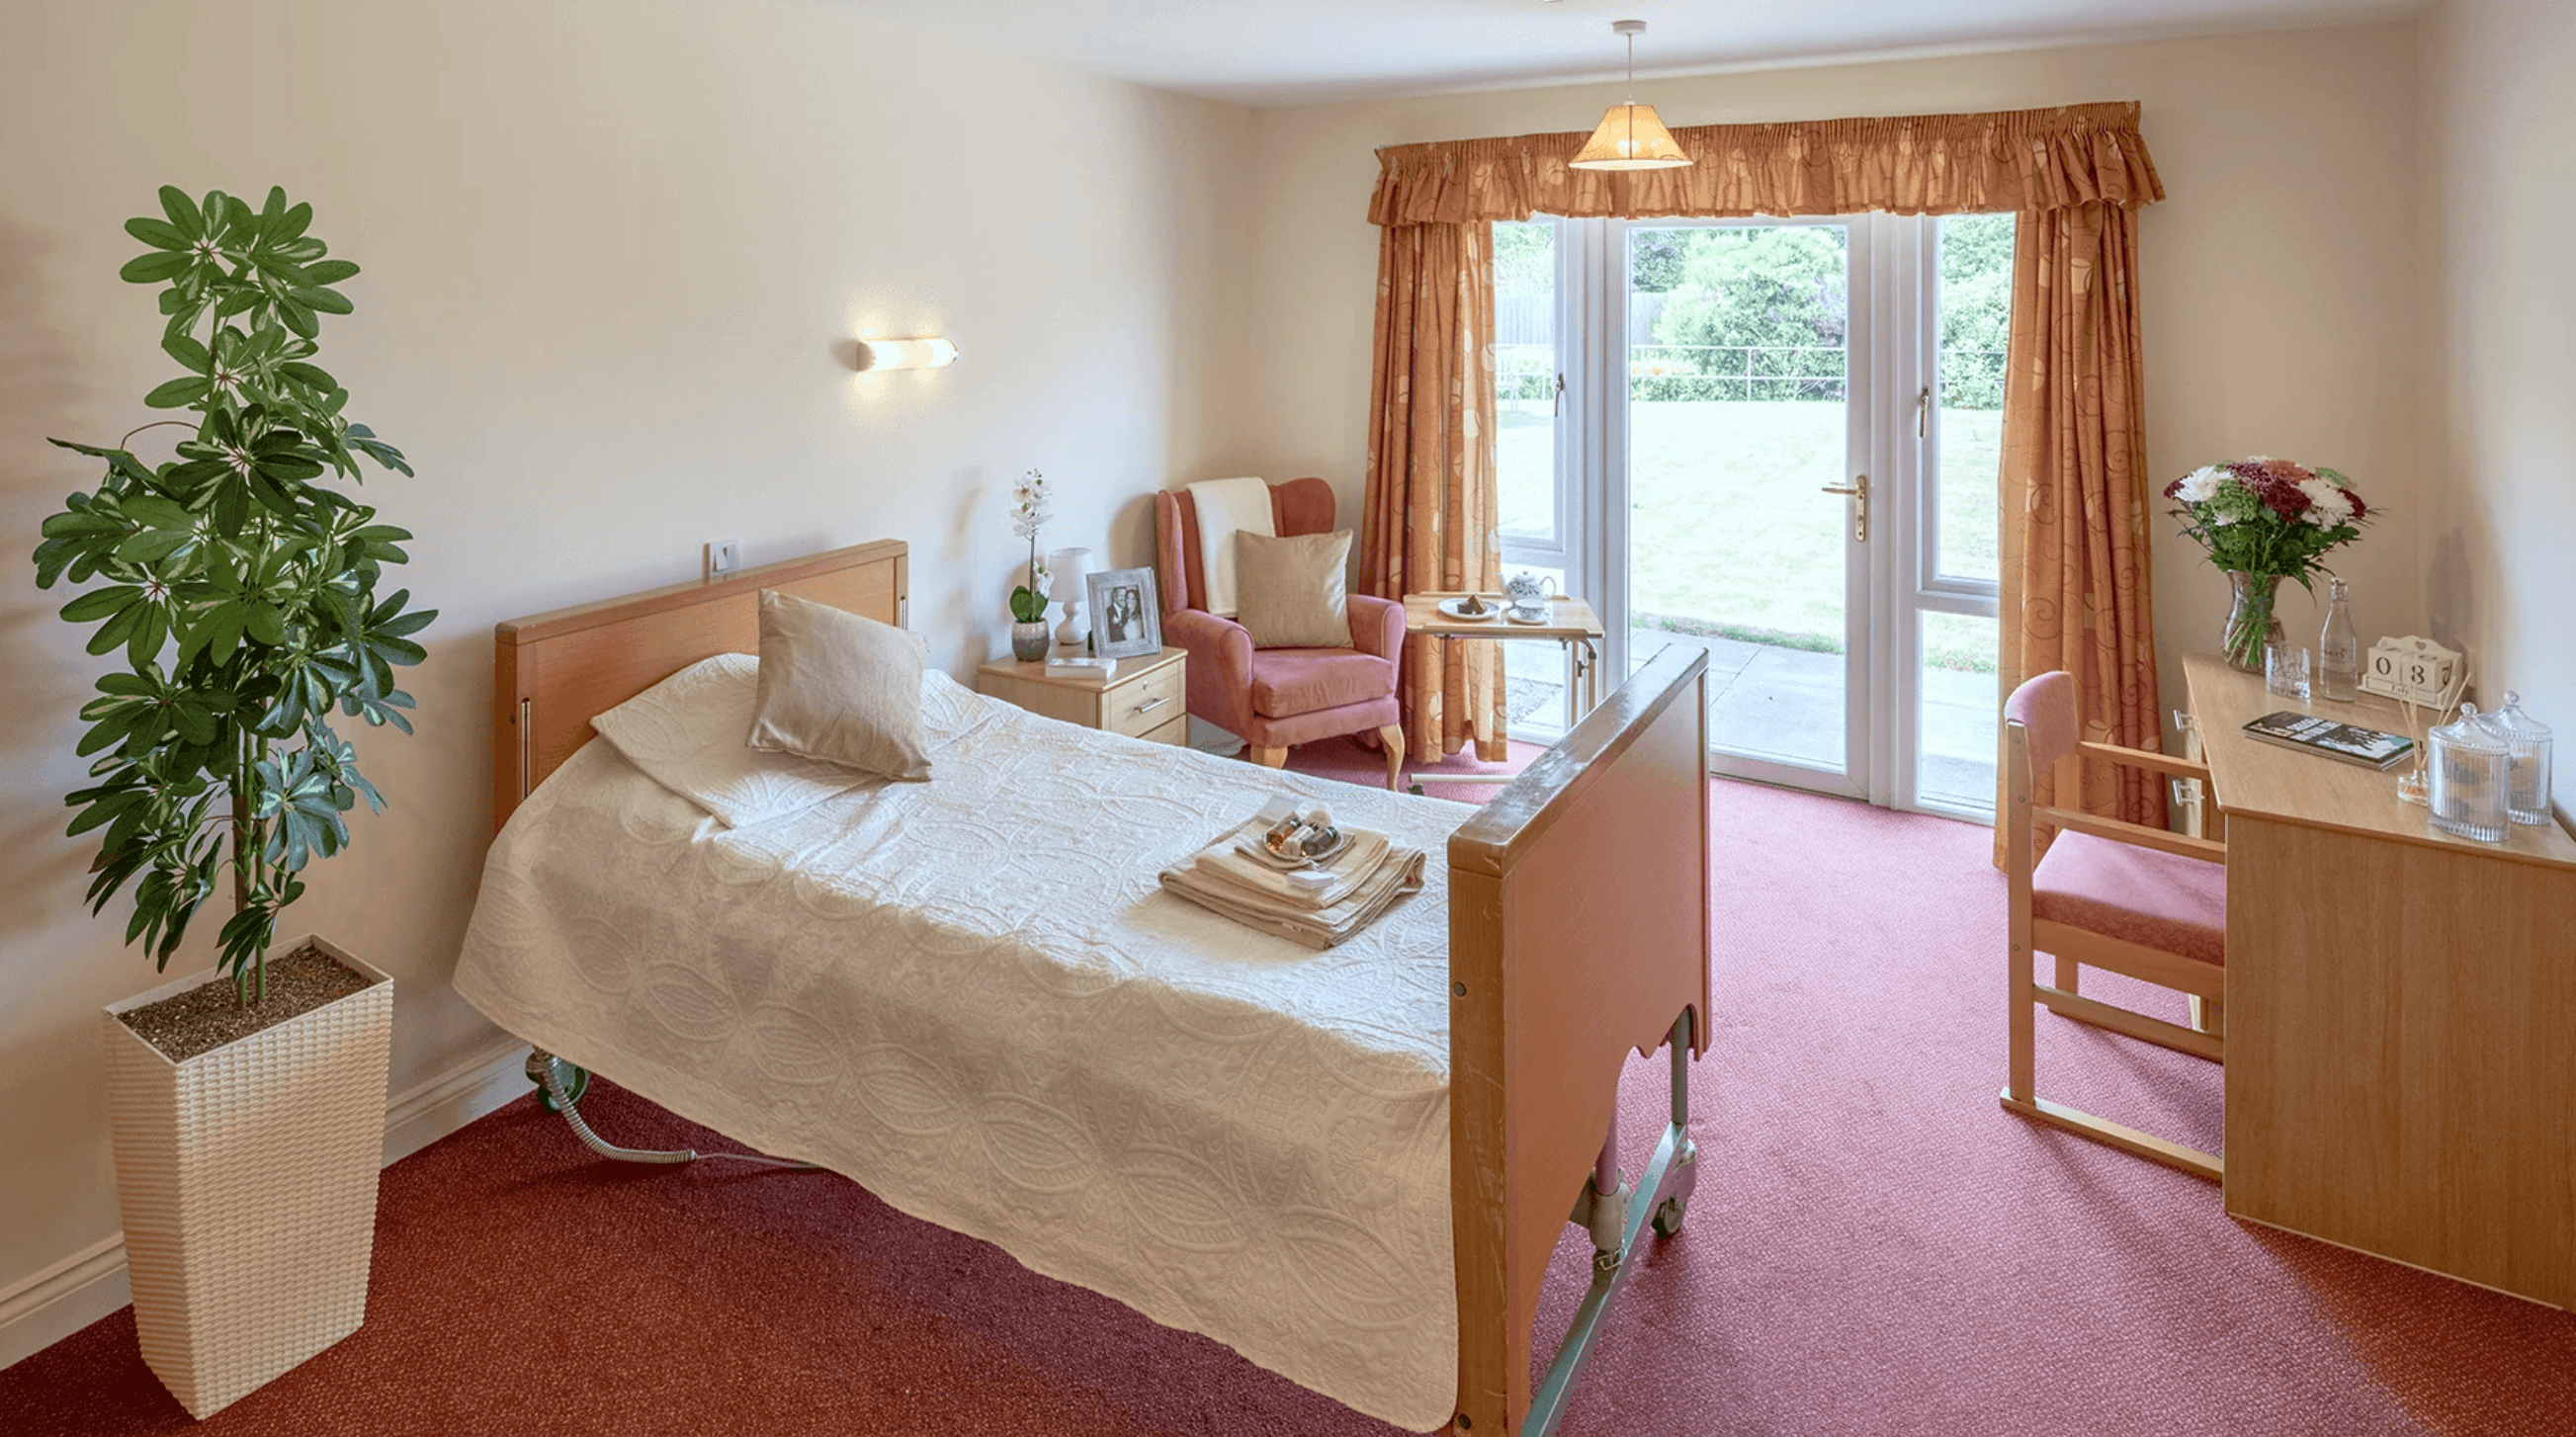 Bedroom at Clare Court Care Home, Birmingham